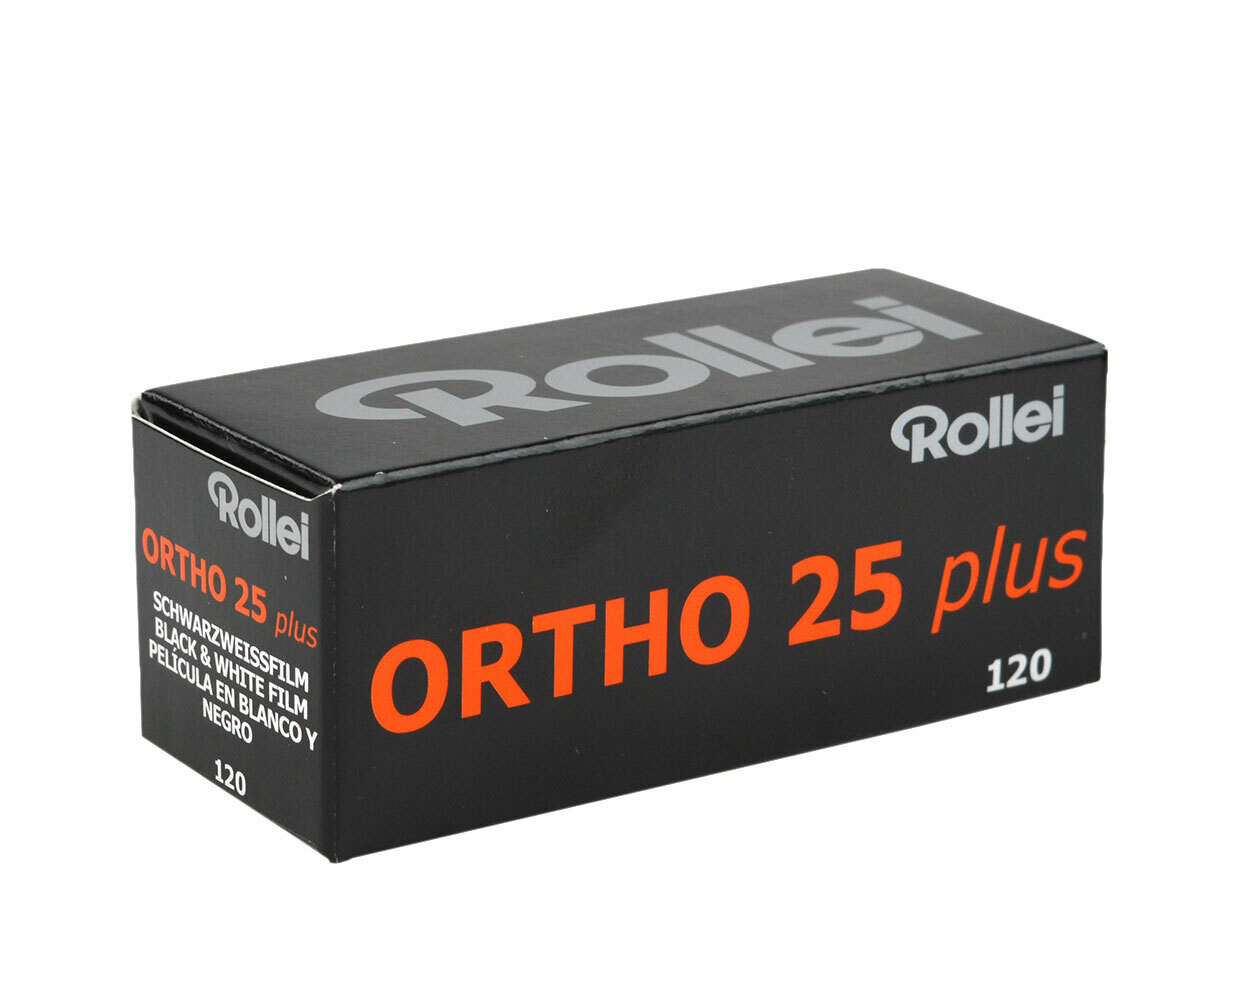 Rollei Ortho 25 Plus Black and White Negative Film (120 Roll Film) date 04/2021